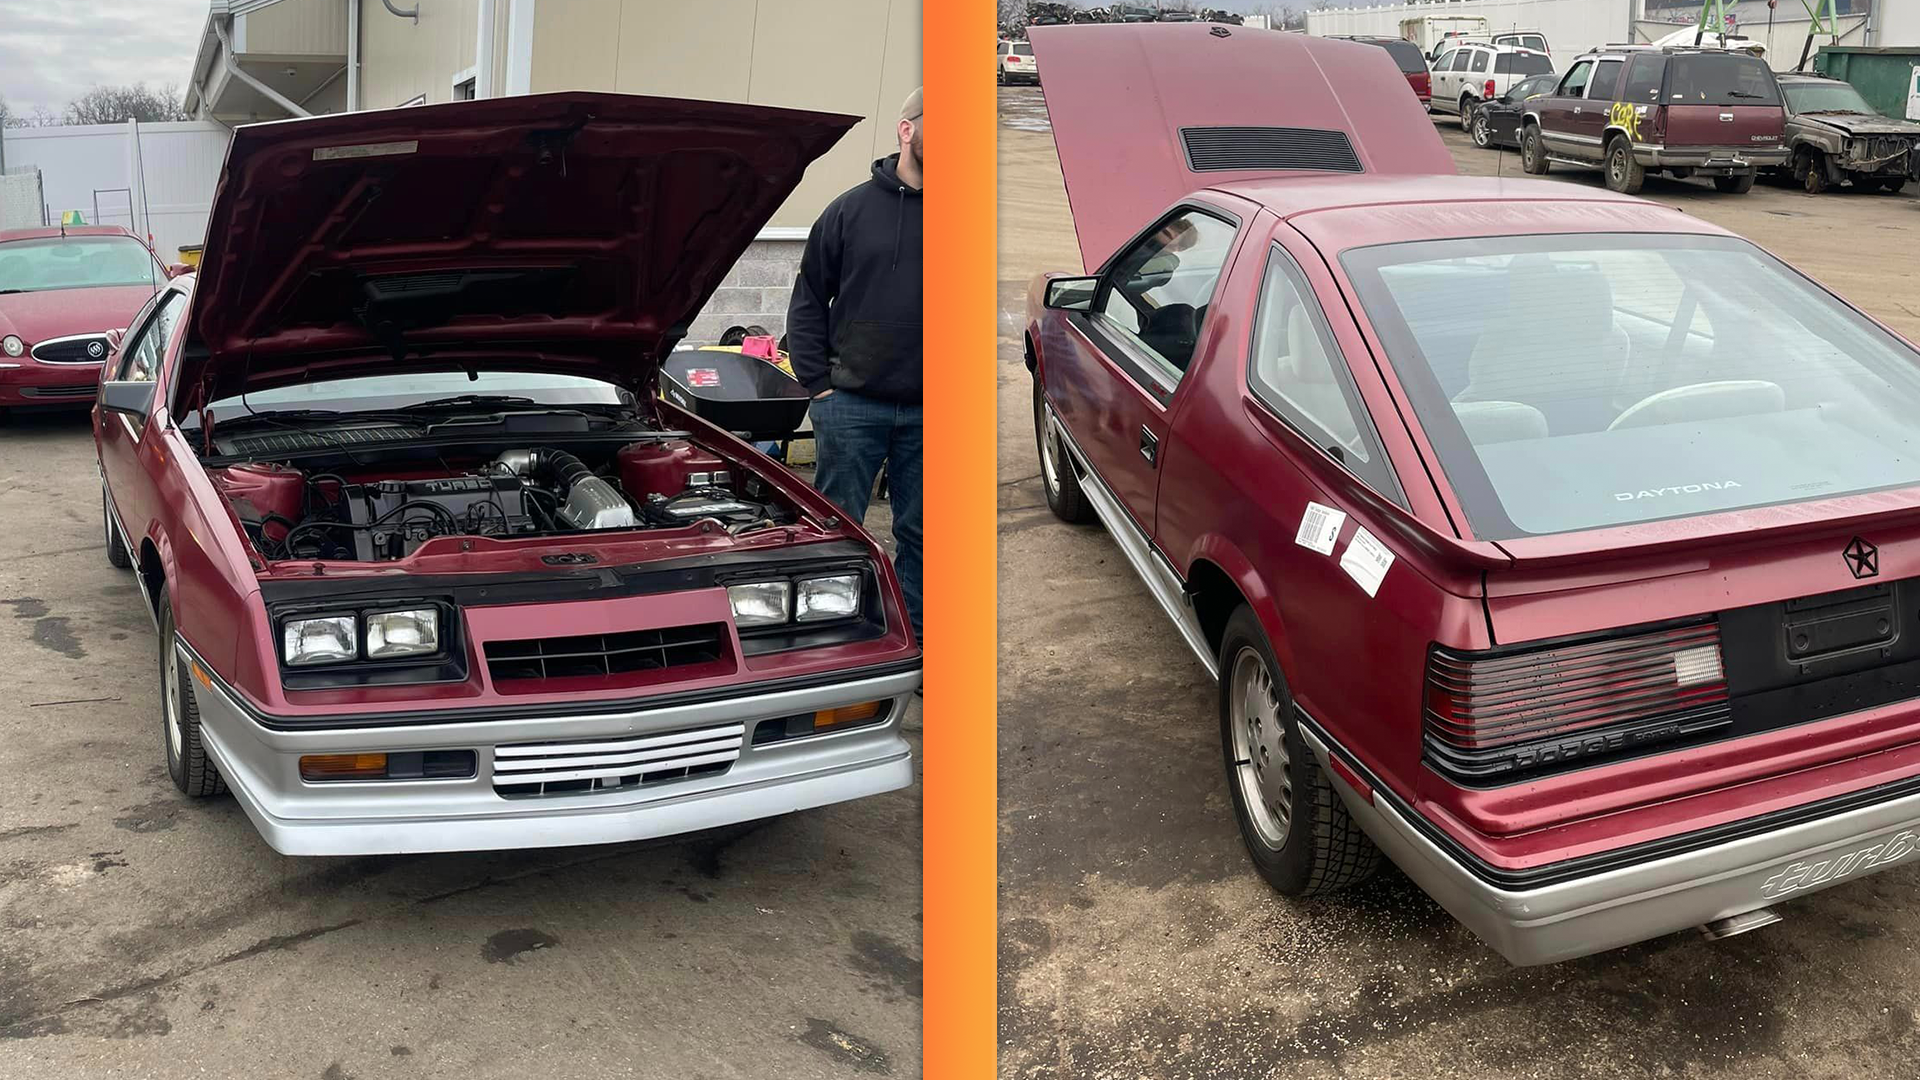 Did This Mint 1985 Chrysler Daytona Get Accidentally Parted Out at a Salvage Yard?